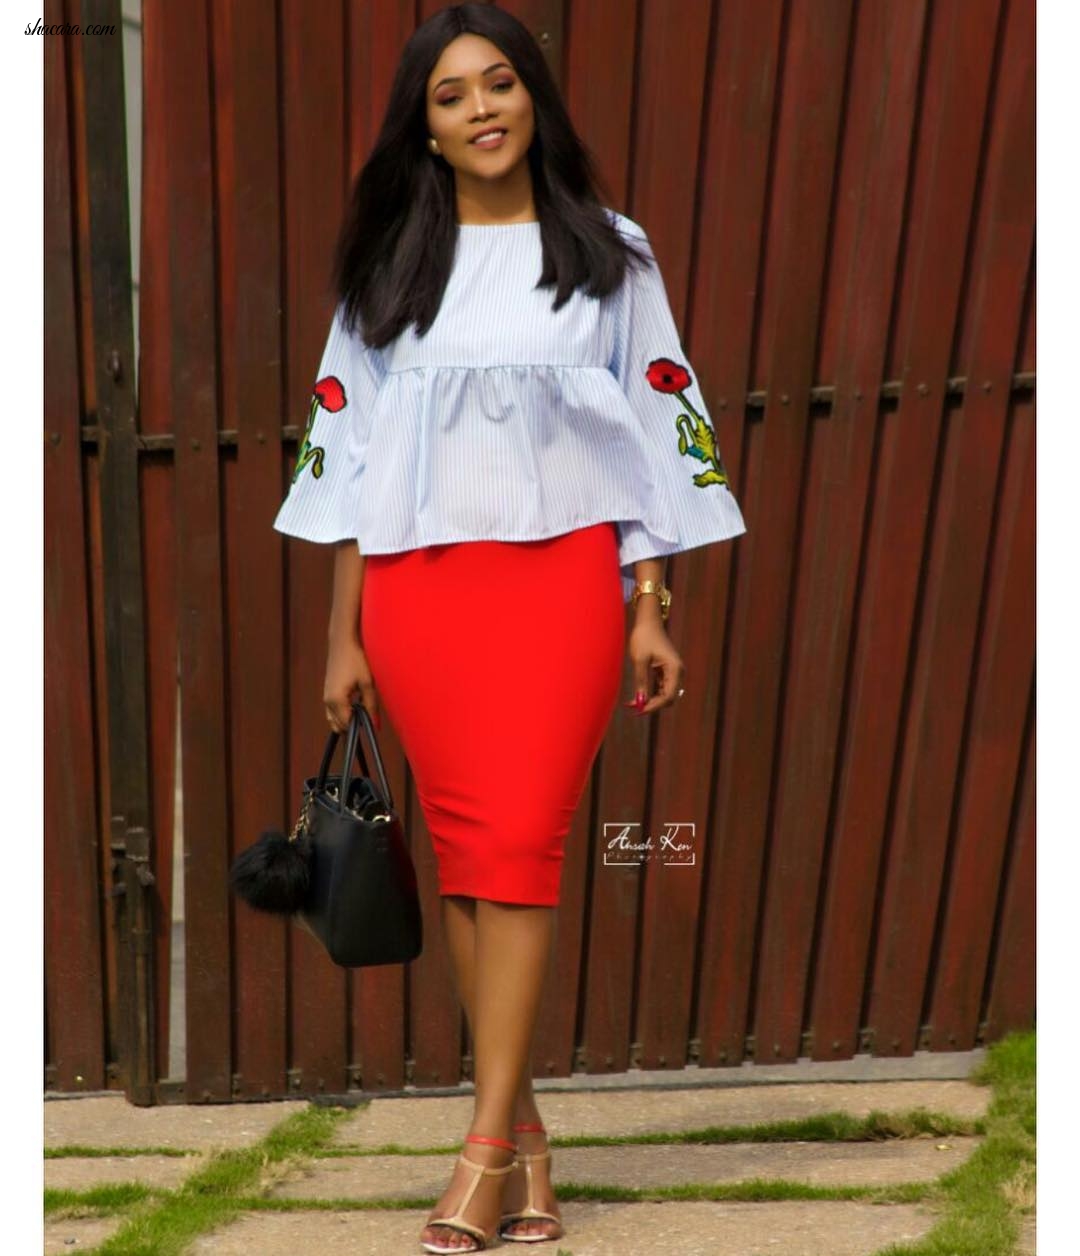 LOOK AND FEEL GOOD IN BEAUTIFUL BUSINESS CASUAL ATTIRES TO WORK